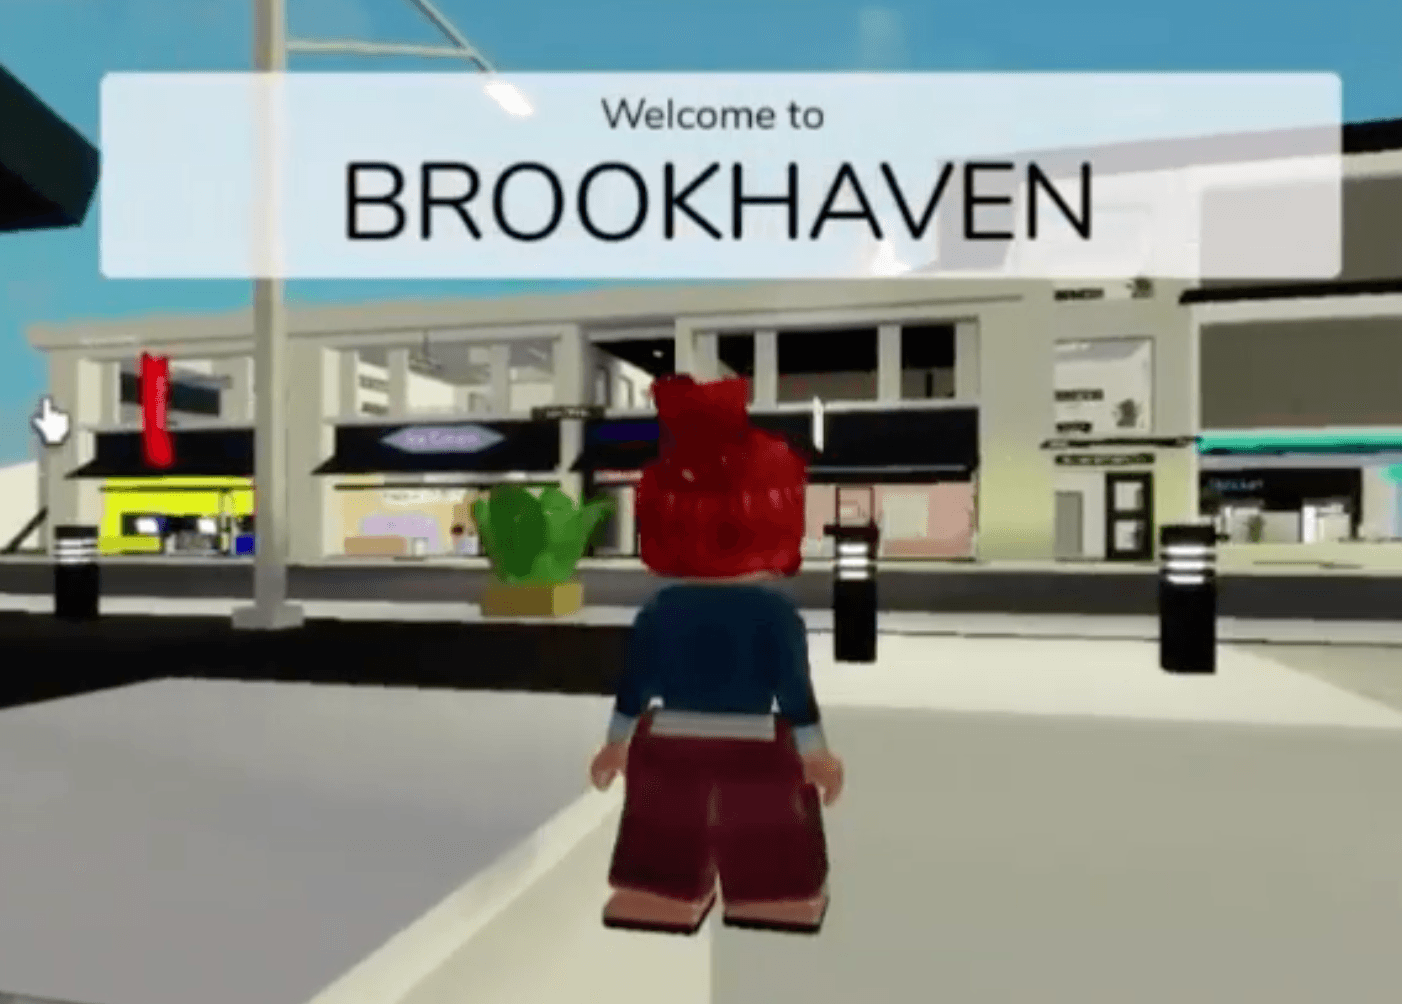 Play Watch Lit Brookhaven Gameplay online on now.gg